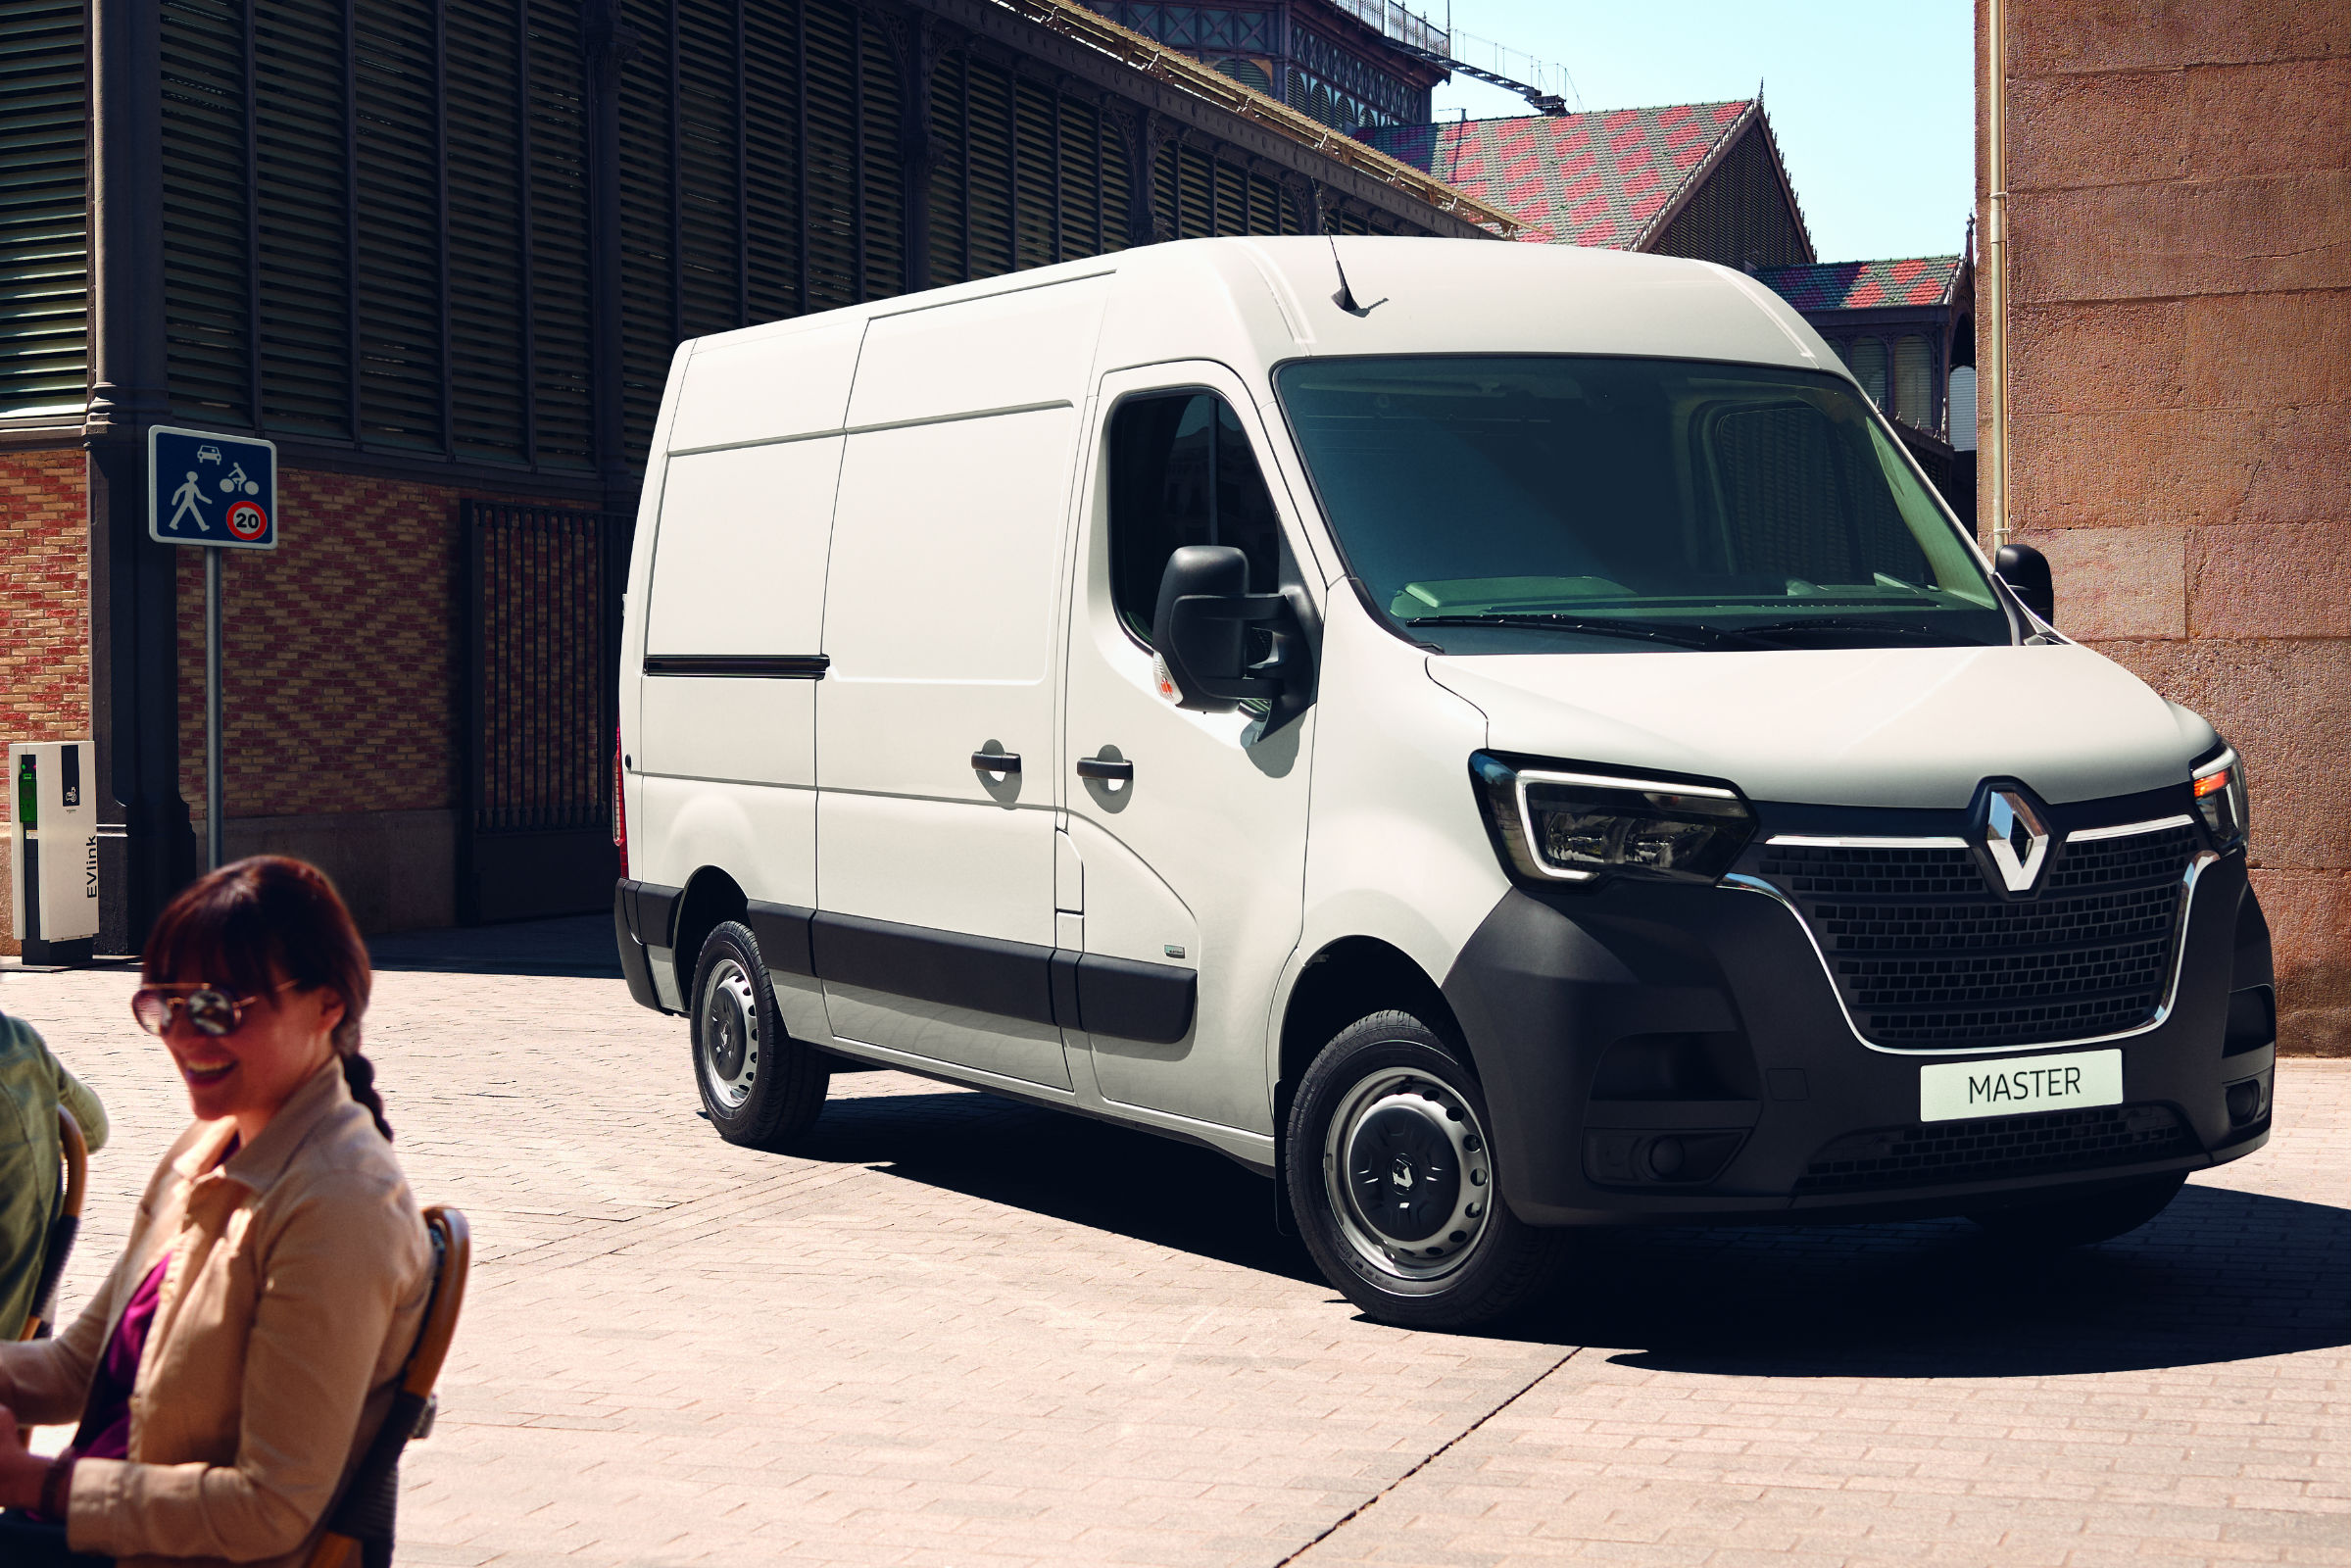 New 2019 Renault Master reveals all Auto Express